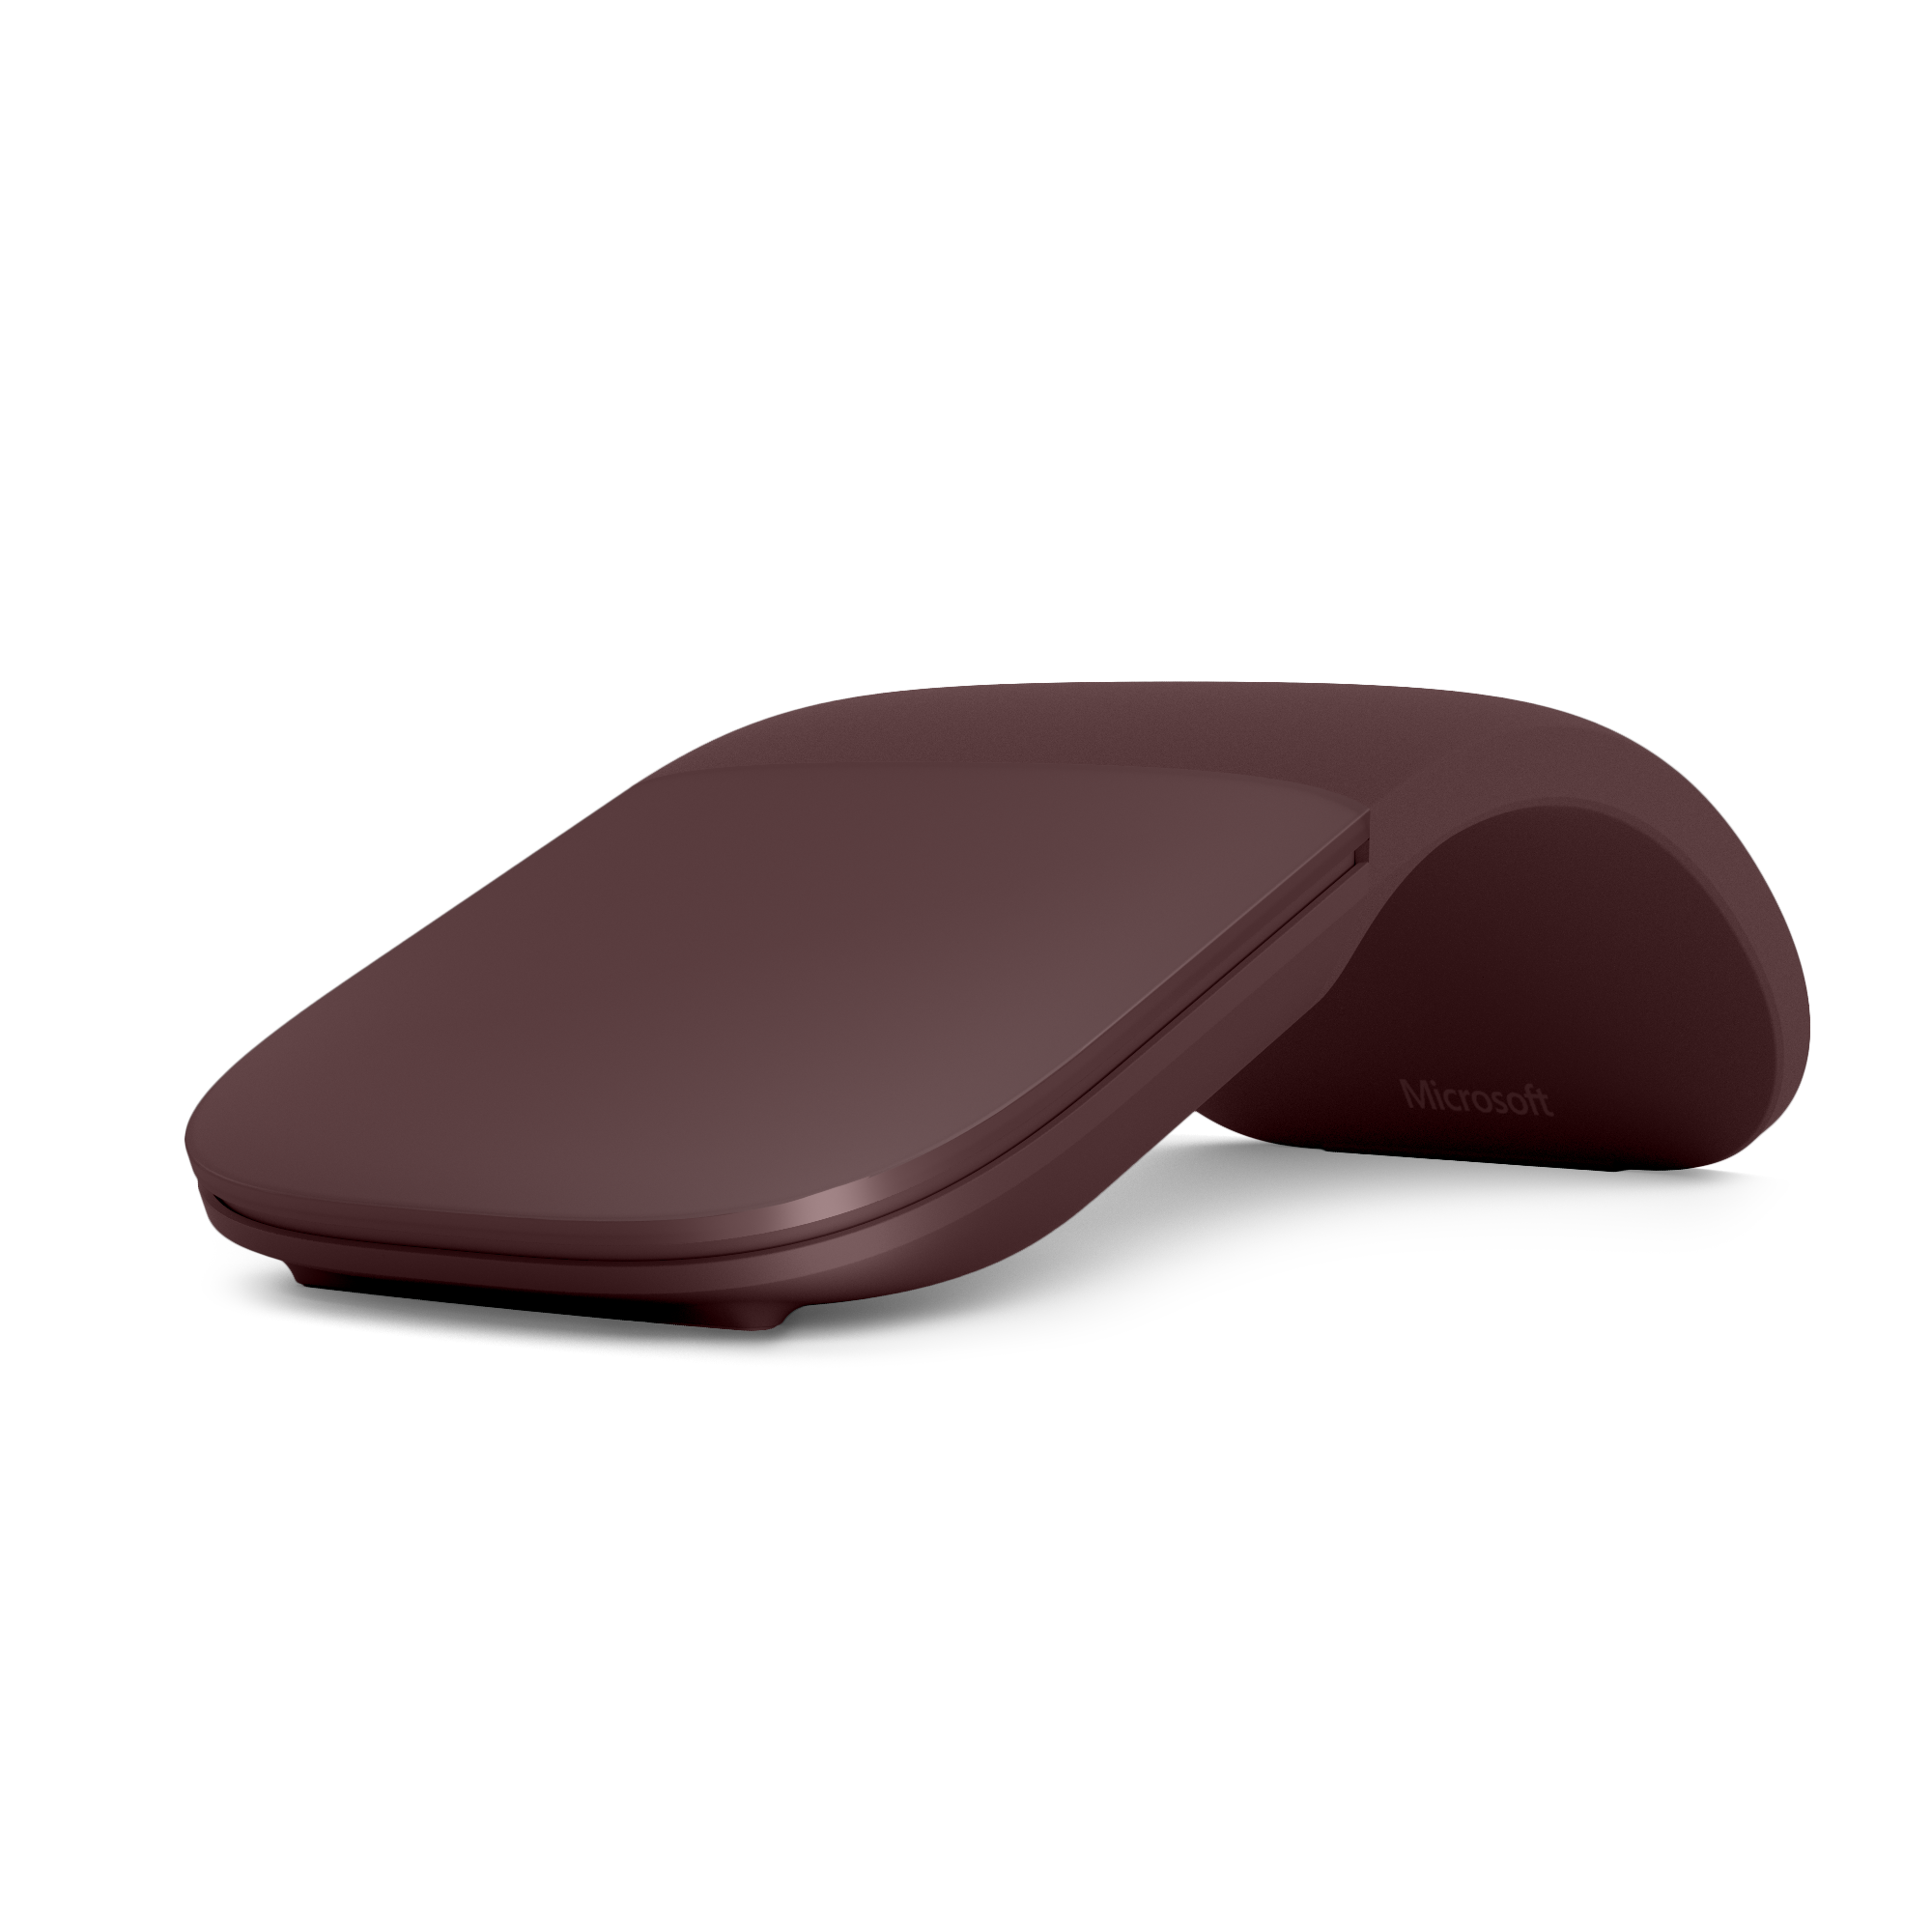 – Microsoft #MicrosoftEDU Event Burgundy, hand to Mouse designed to your Surface in Arc conform